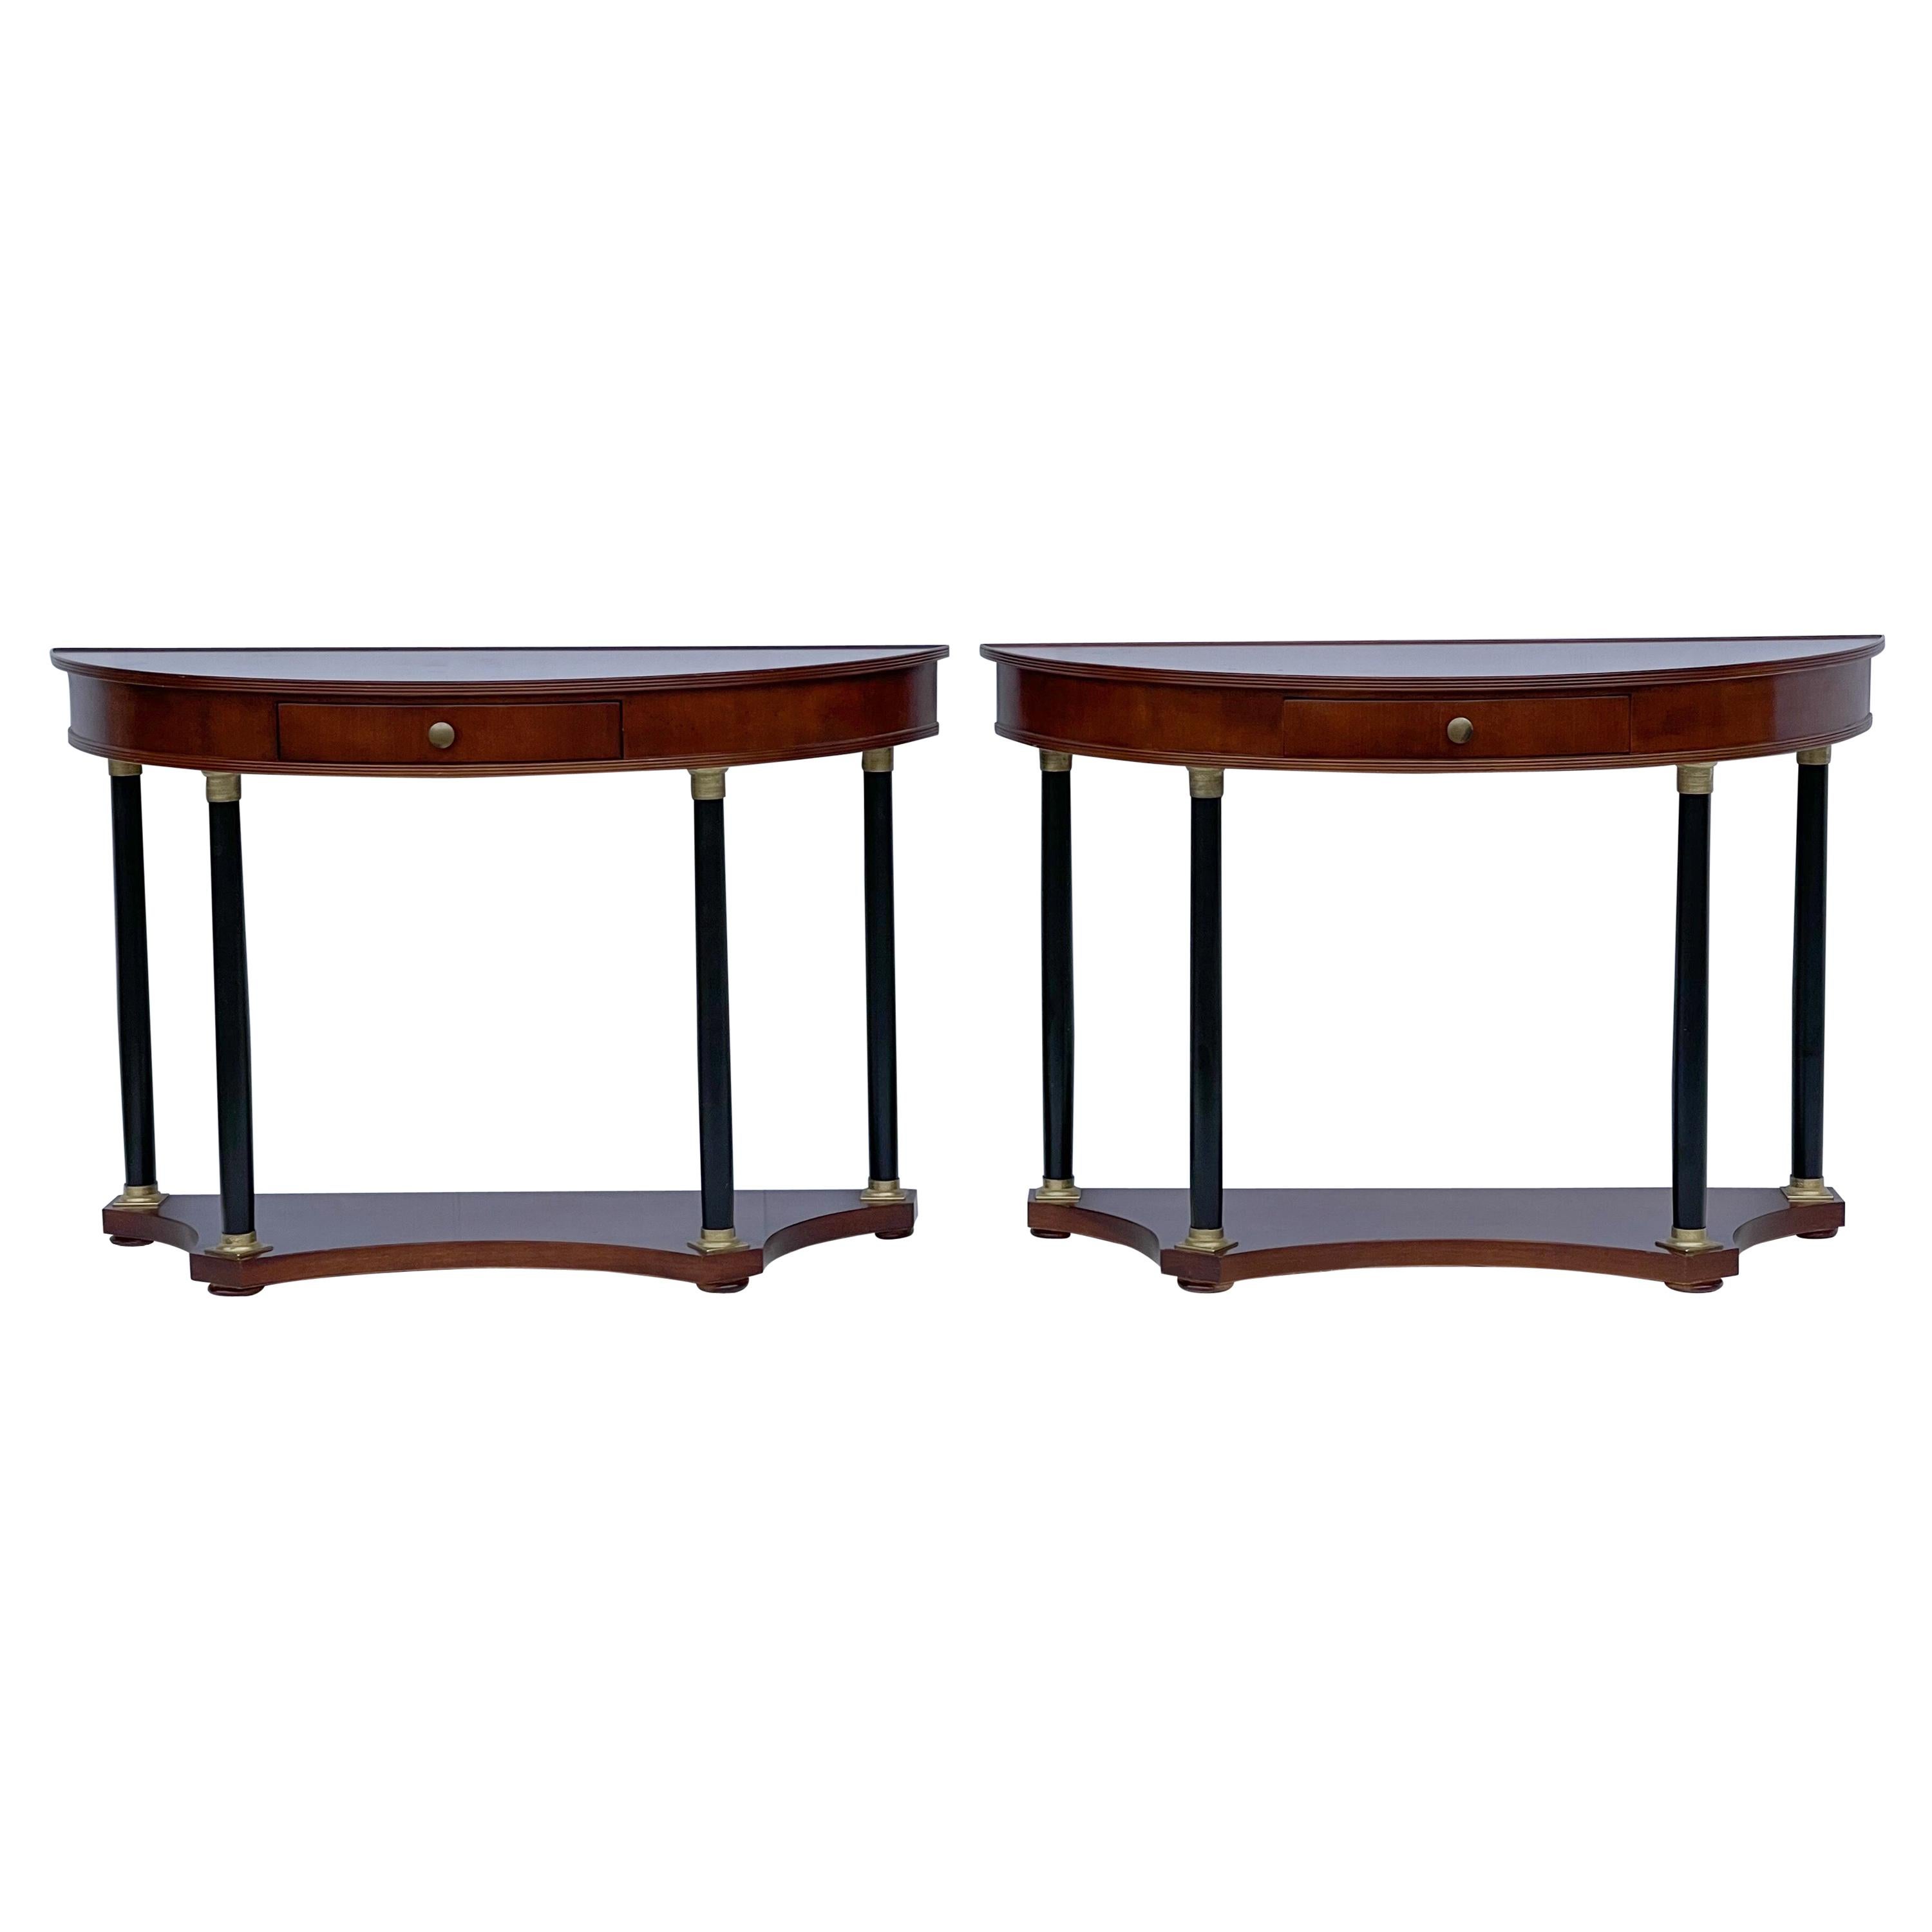 Italian Neo-Classical Style Console Tables by Decorative Crafts, a Pair